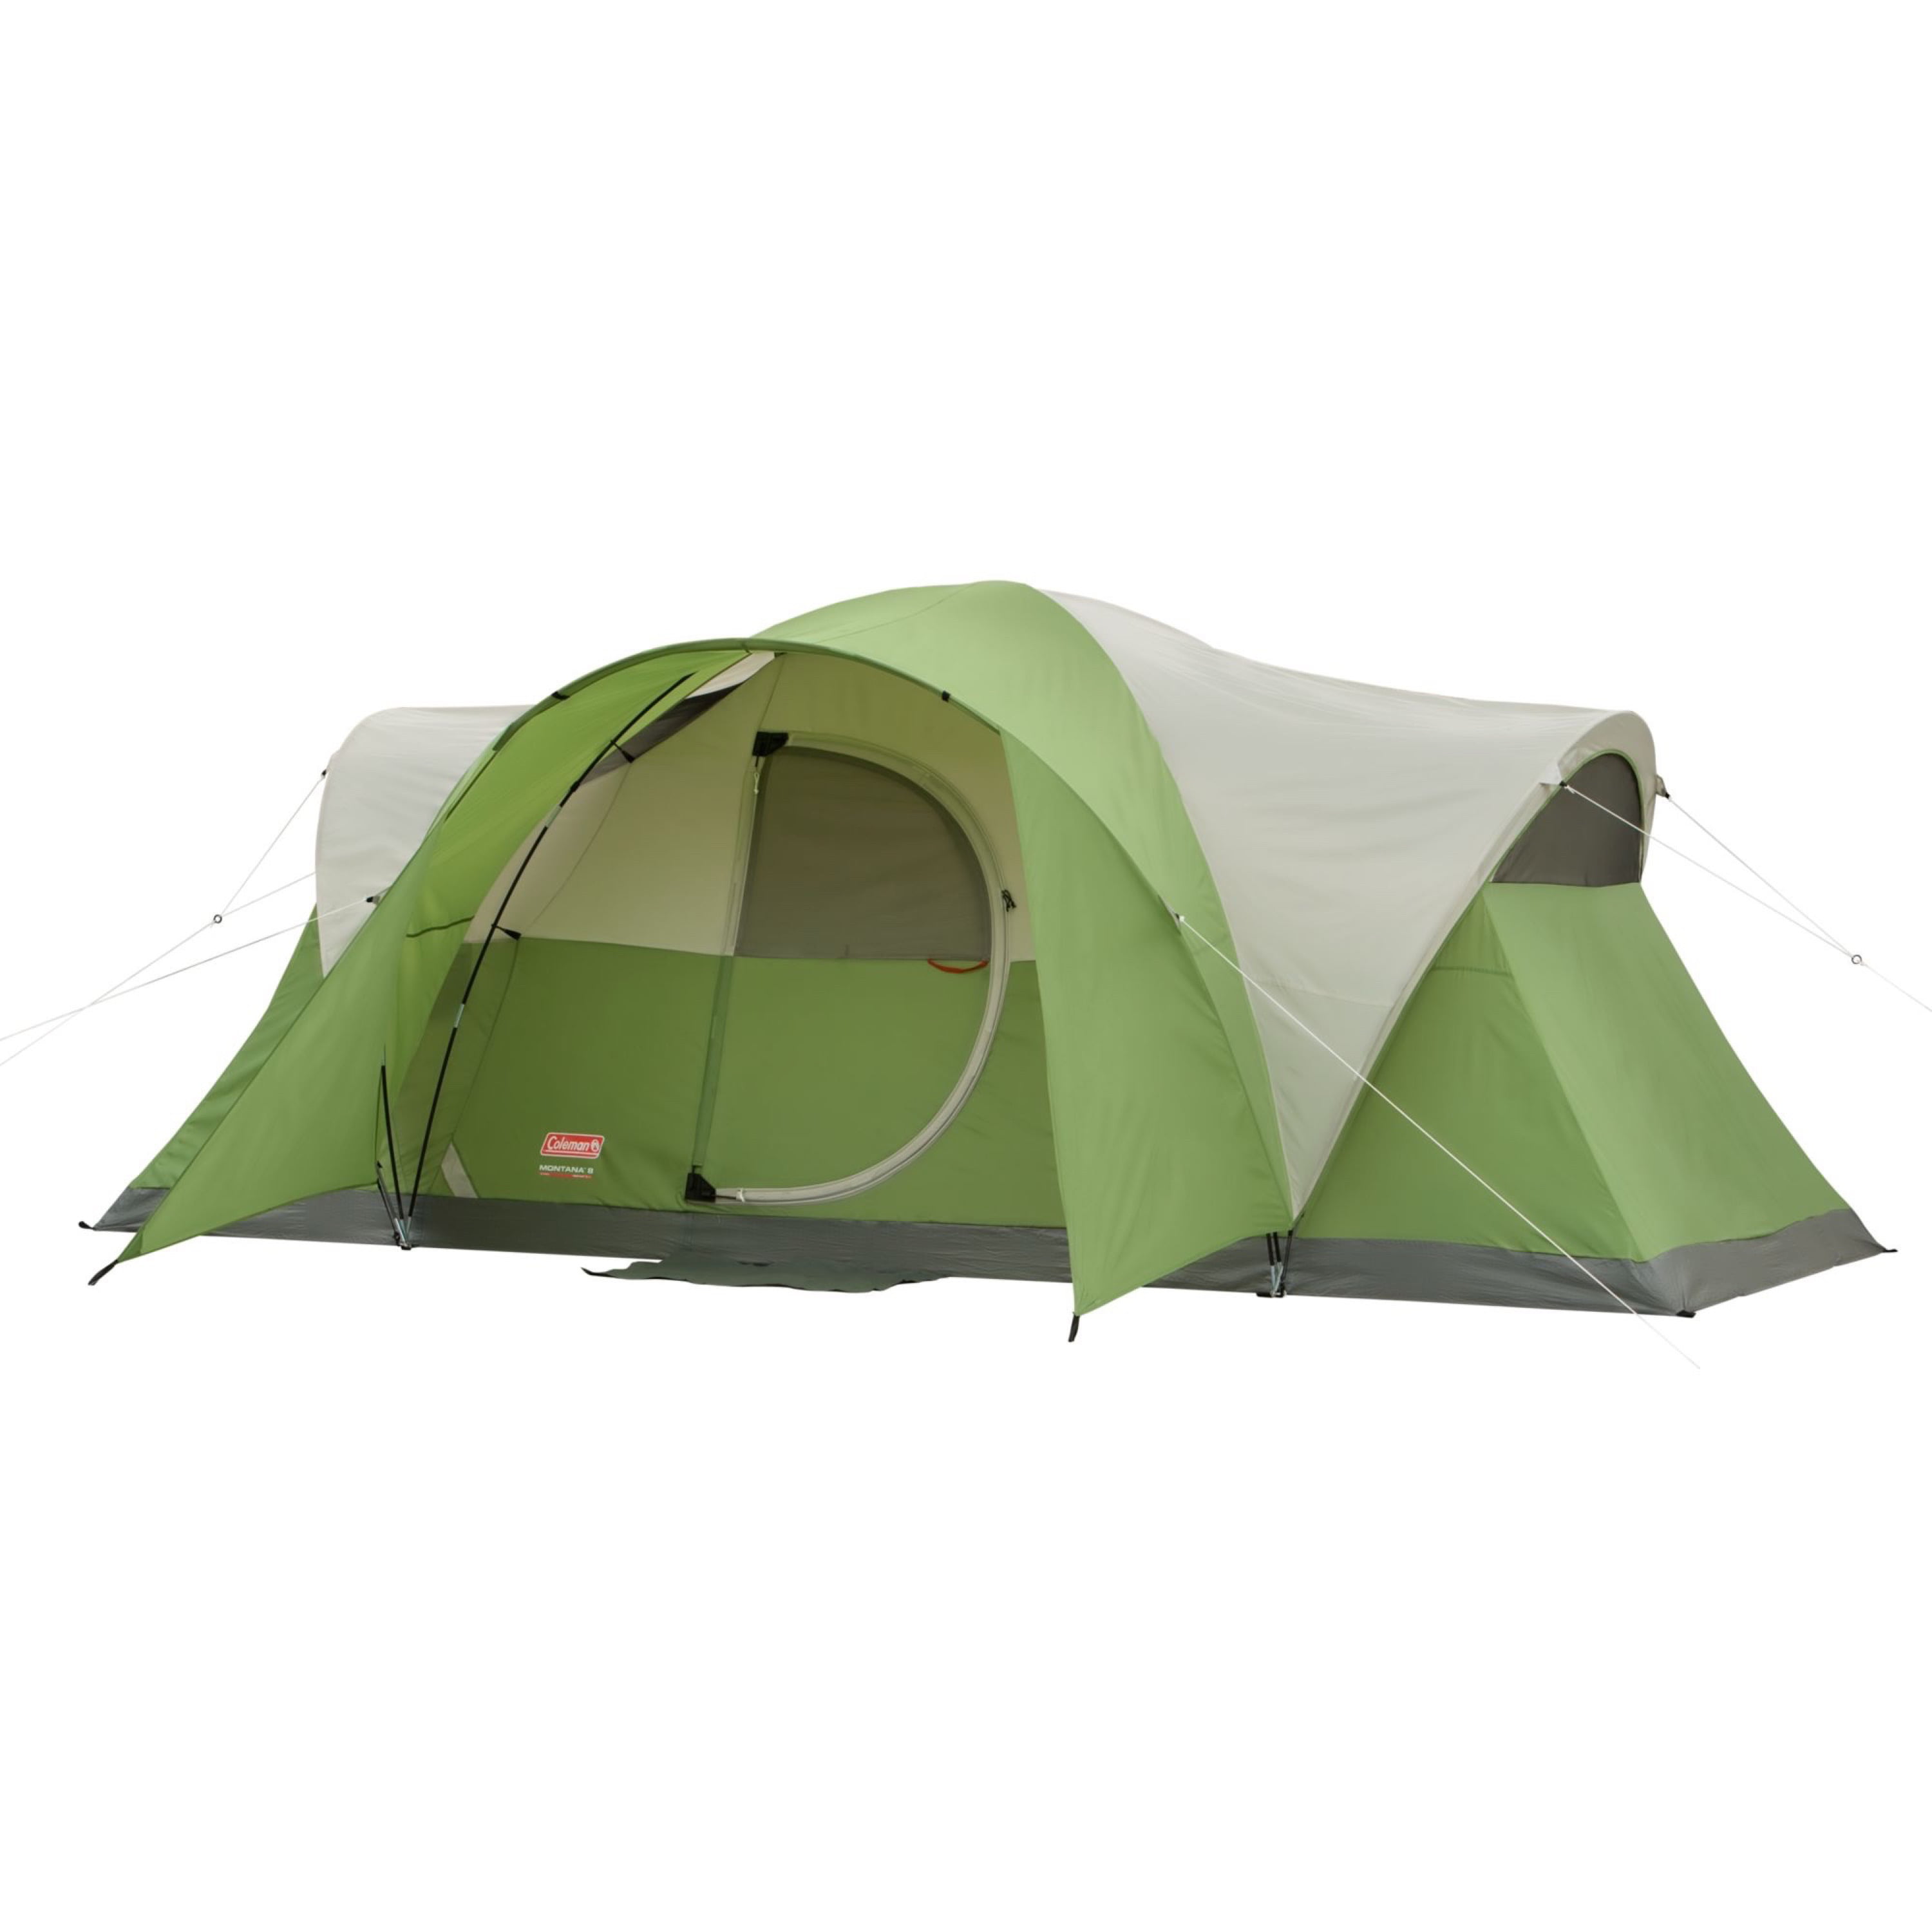 Walmart+ Members: Coleman Montana 8-Person Dome Tent (Green) $99 + Free Shipping